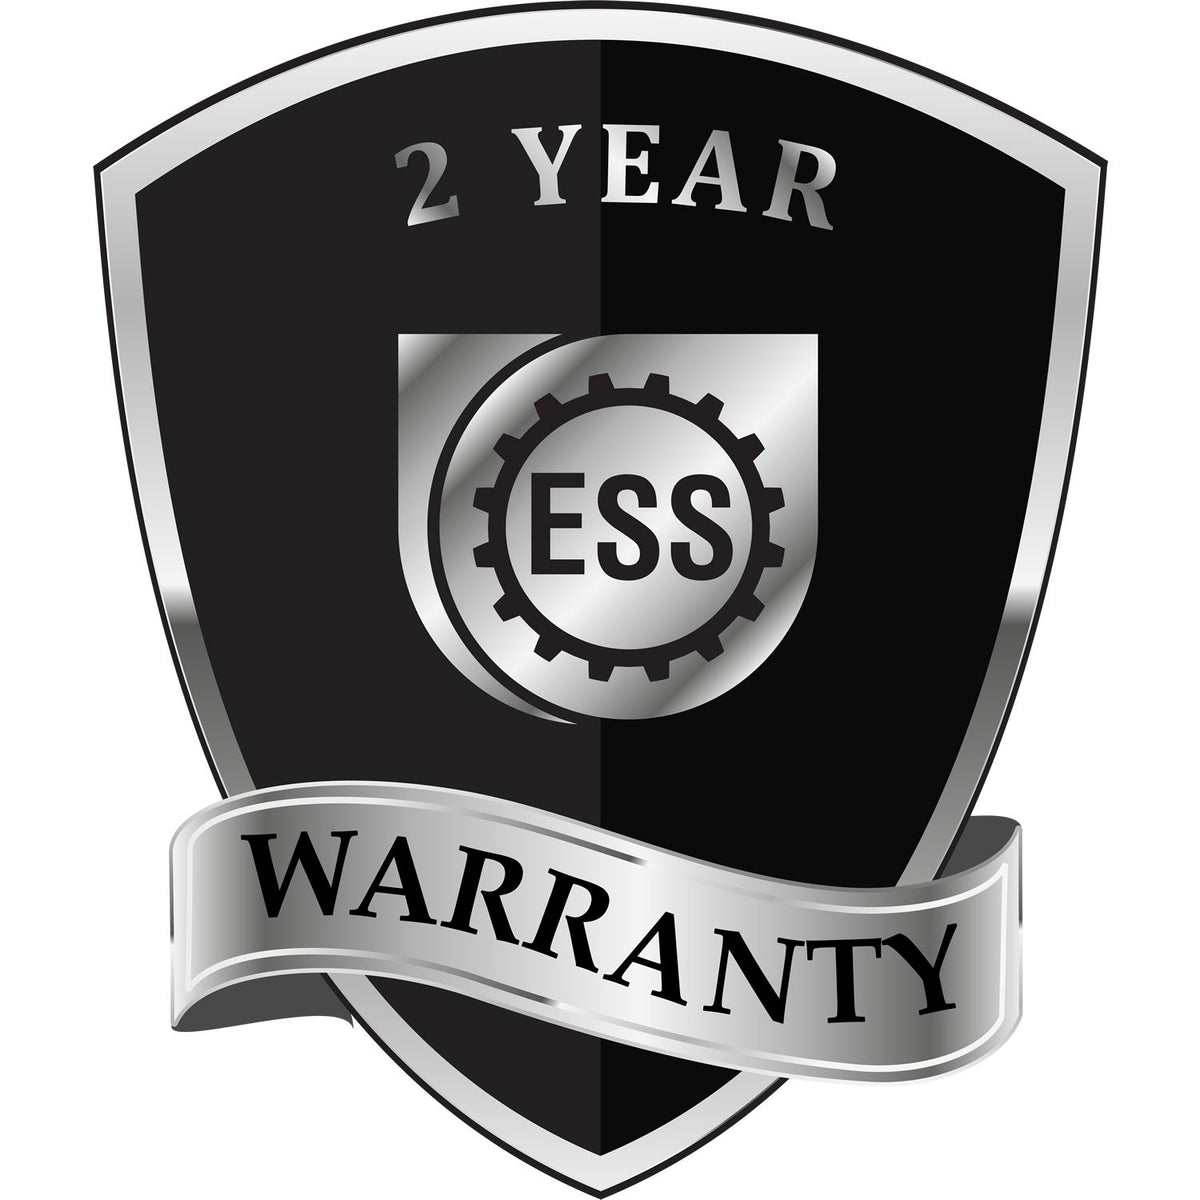 A badge or emblem showing a warranty icon for the Long Reach Montana PE Seal